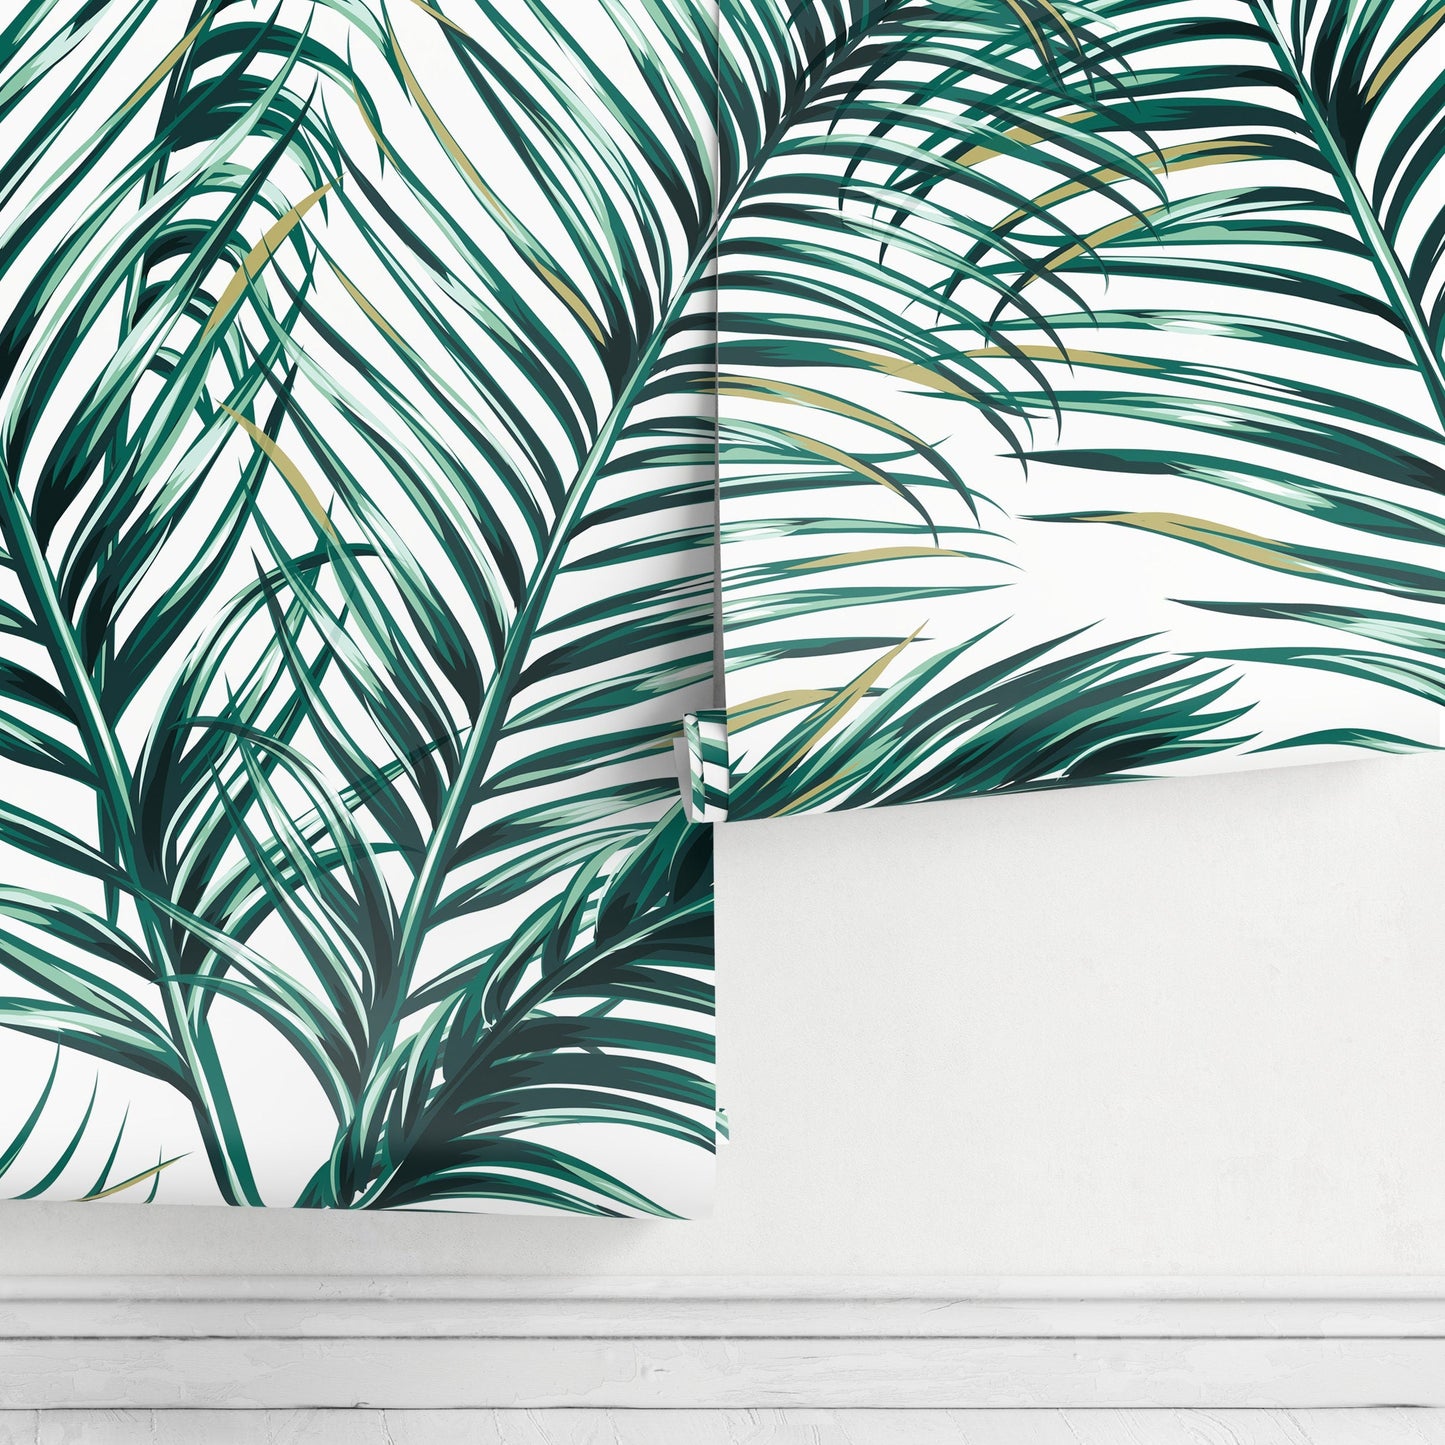 Wallpaper Peel and Stick Wallpaper Removable Wallpaper Home Decor Wall Art Wall Decor Room Decor / Tropical Leaves Palm Wallpaper - B121